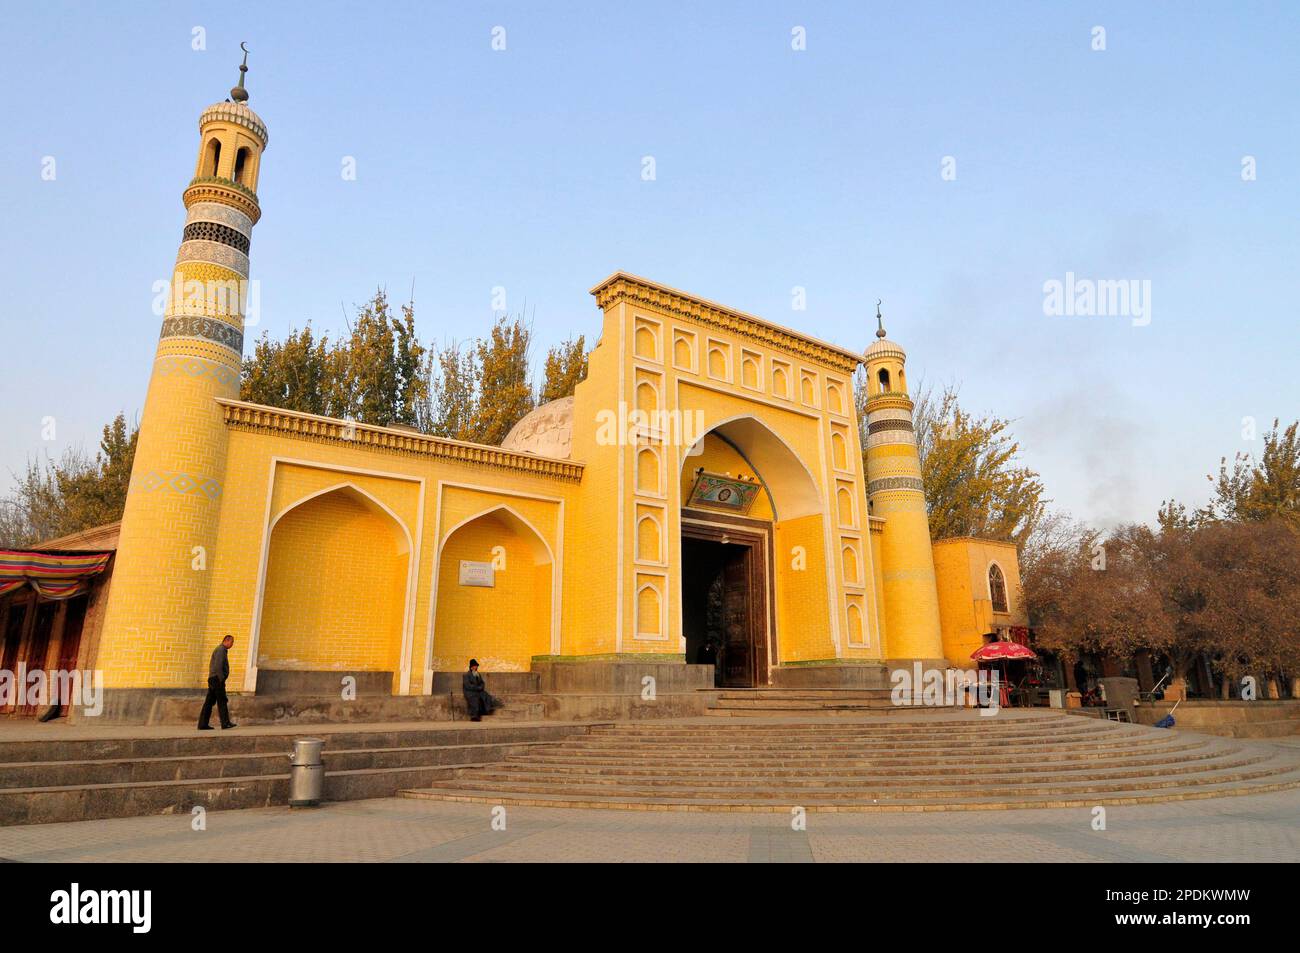 Id Kah Mosque in  Kashgar, China. Stock Photo